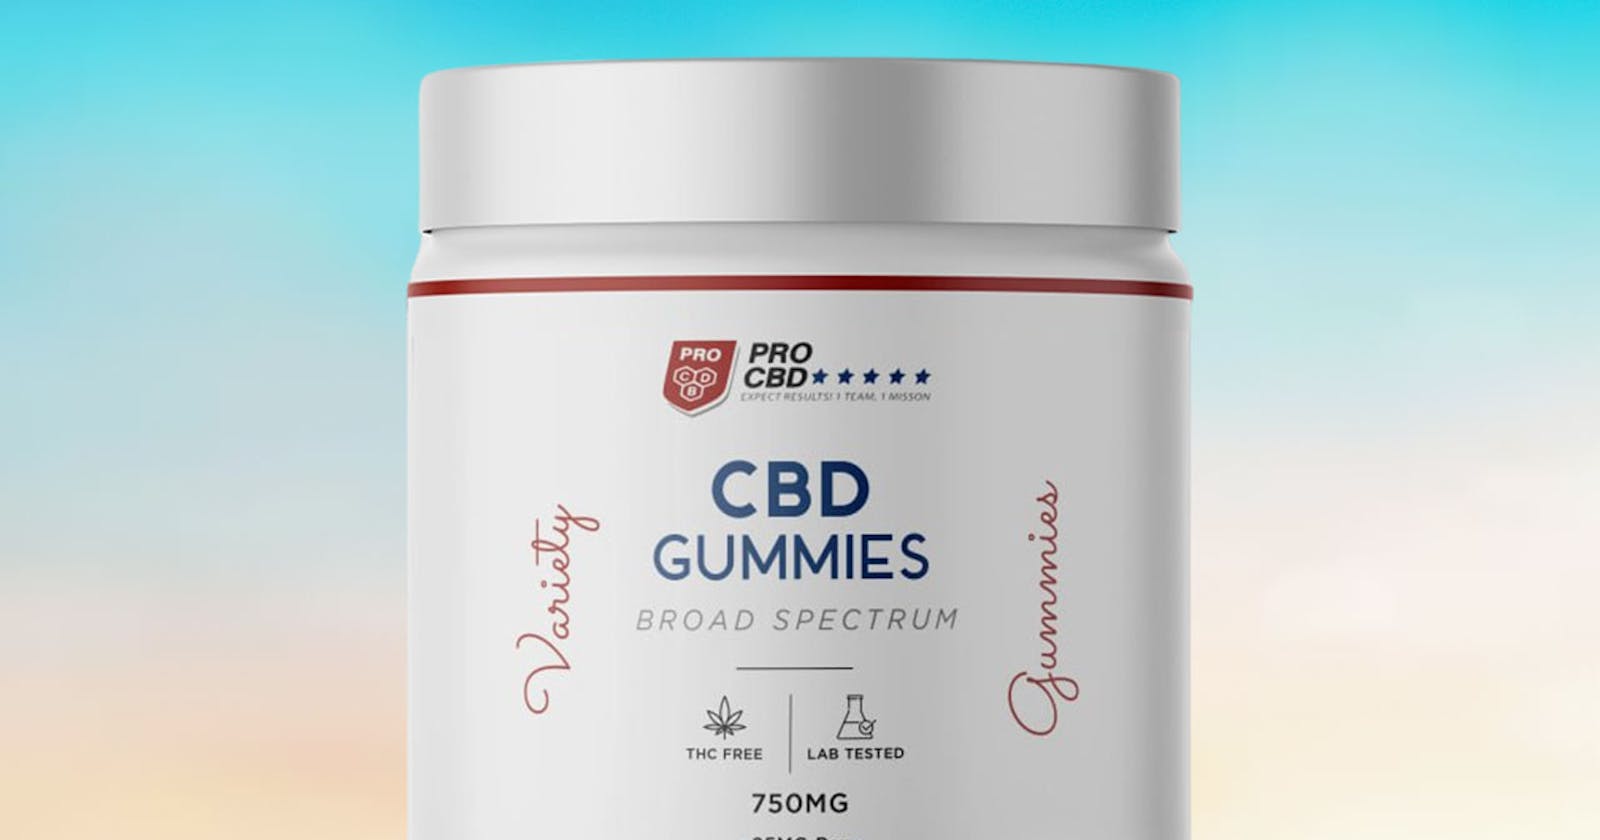 Pro Players CBD Gummies Review - Get BIGGER & More Impressive In Bed!